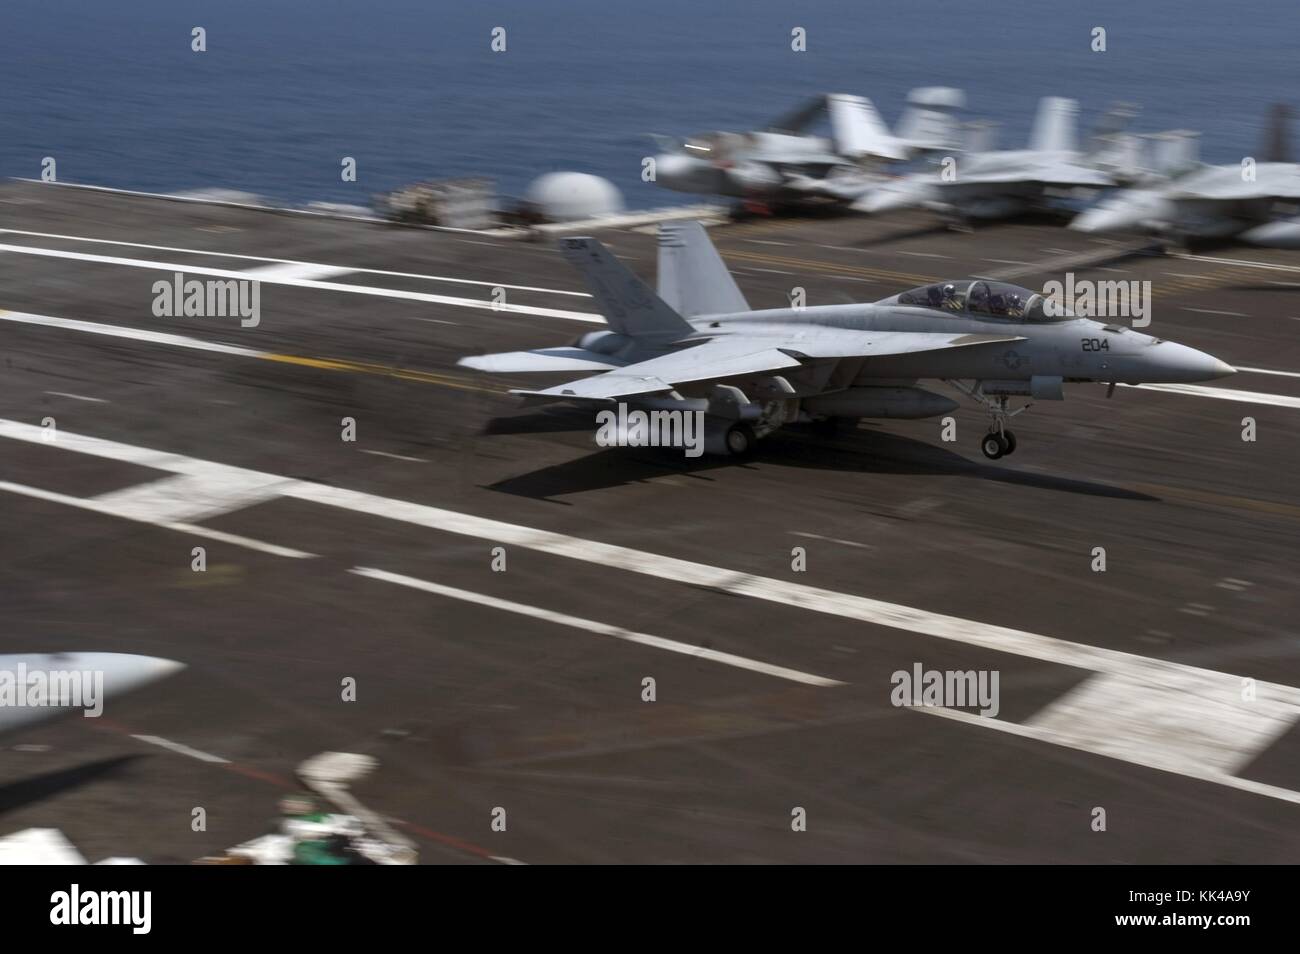 An F/A-18F Super Hornet assigned to the Jolly Rogers of Strike Fighter Squadron VFA 103 lands on the flight deck of Nimitz-class aircraft carrier USS Dwight D Eisenhower CVN 69, Atlantic Ocean, 2012. Image courtesy Mass Communication Specialist 3rd Class Douglas Revell/US Navy. Stock Photo